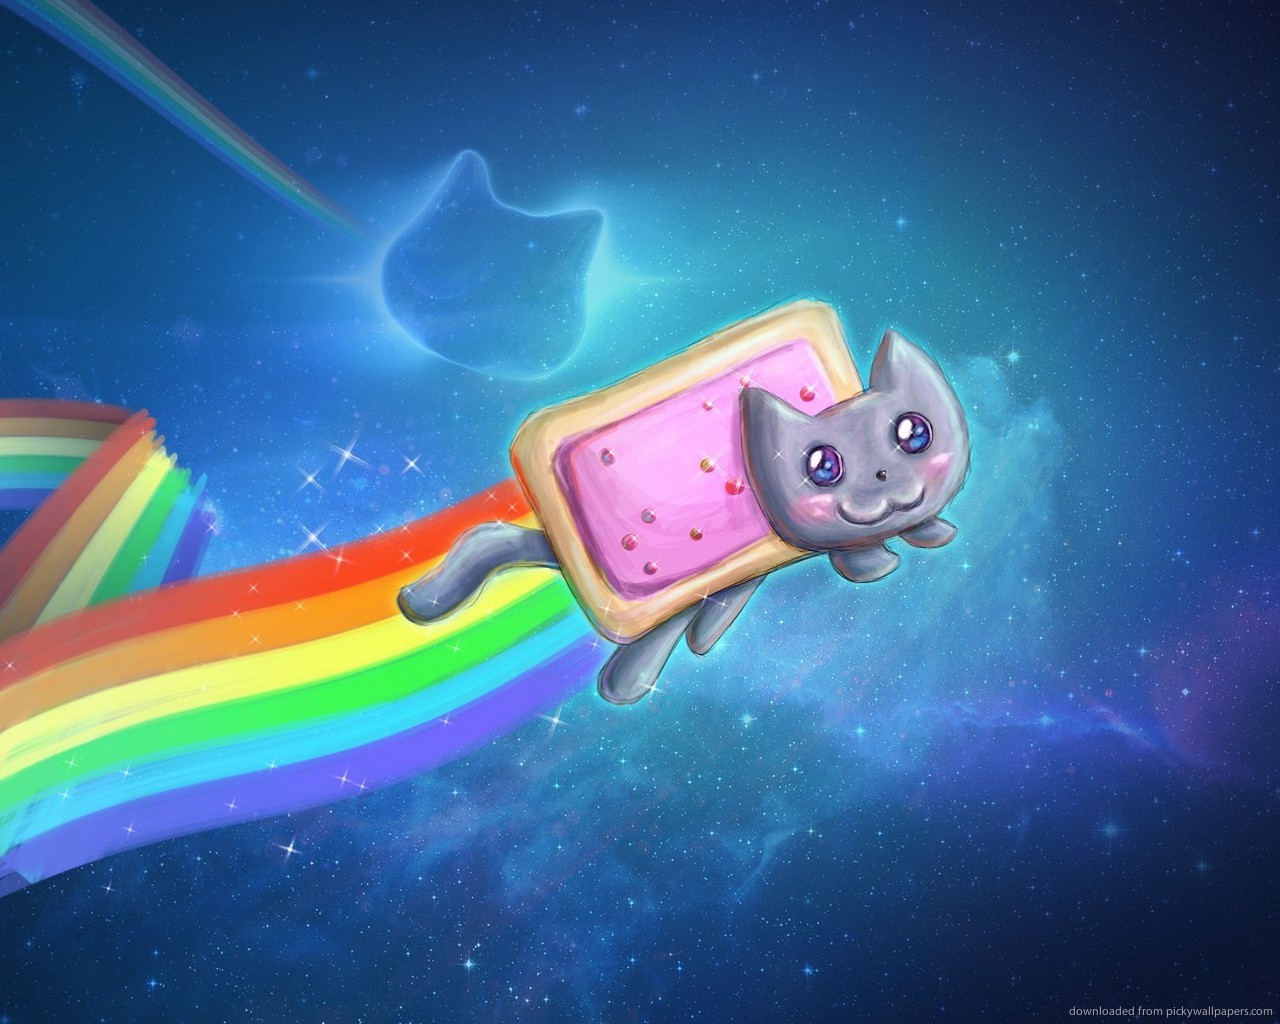 How Long Can You Watch Listen To Nyan Cat Mmdvg